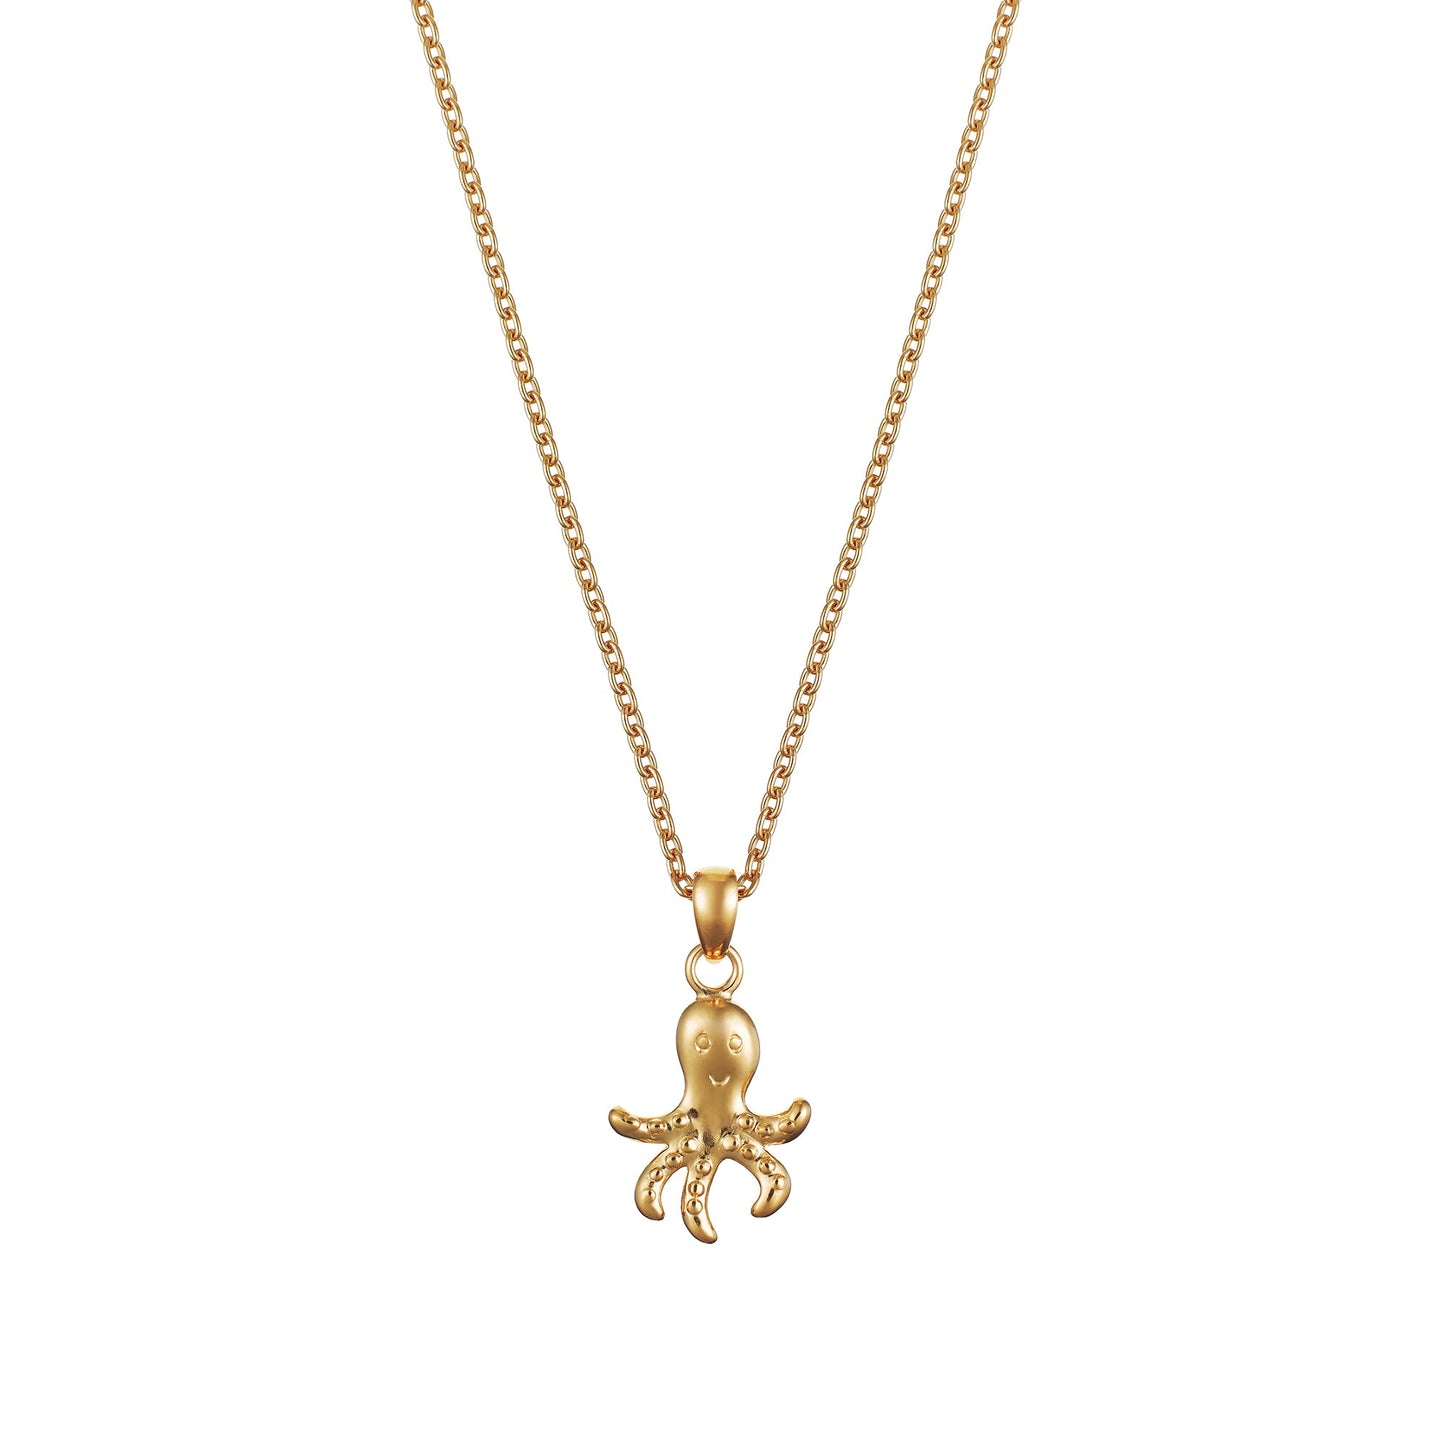 Children's Gold Octopus with Smile Pendant on an Extendable Chain Necklace